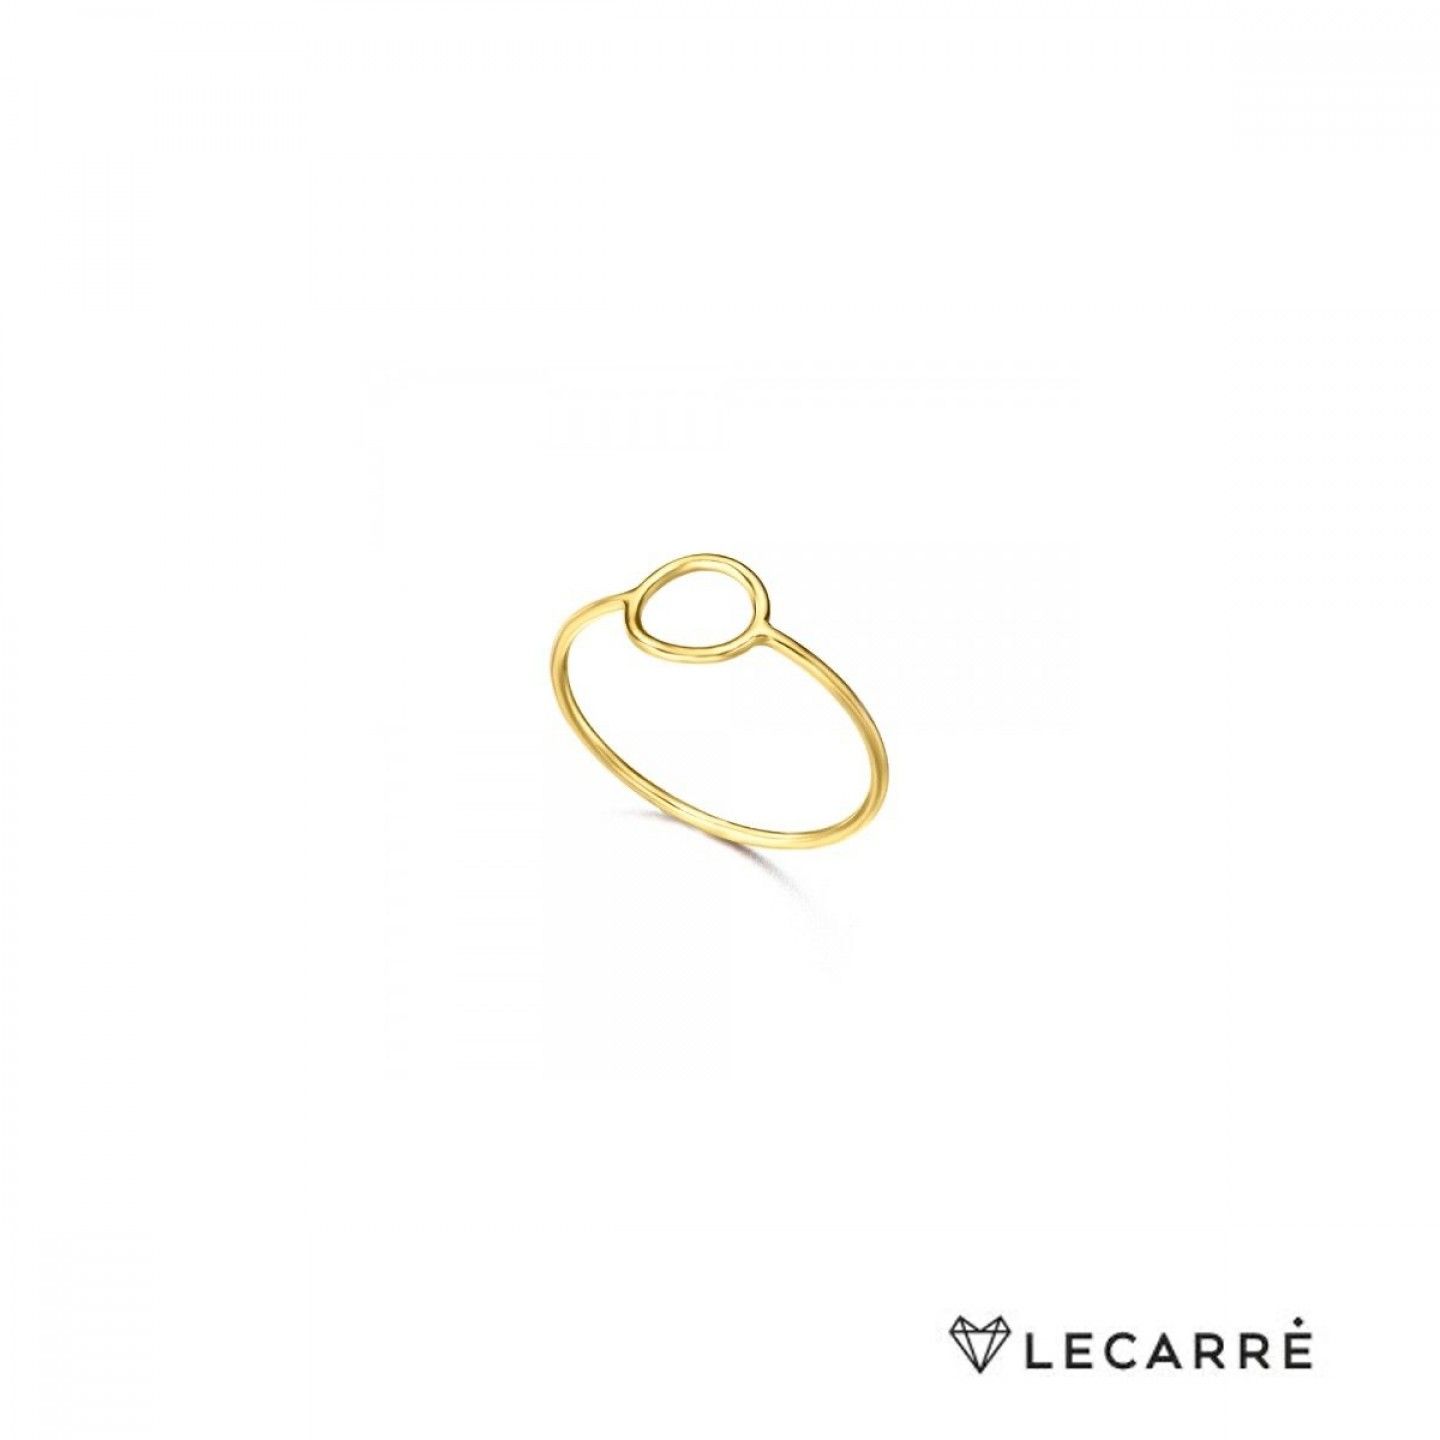 Anel Lecarré Ouro 18K